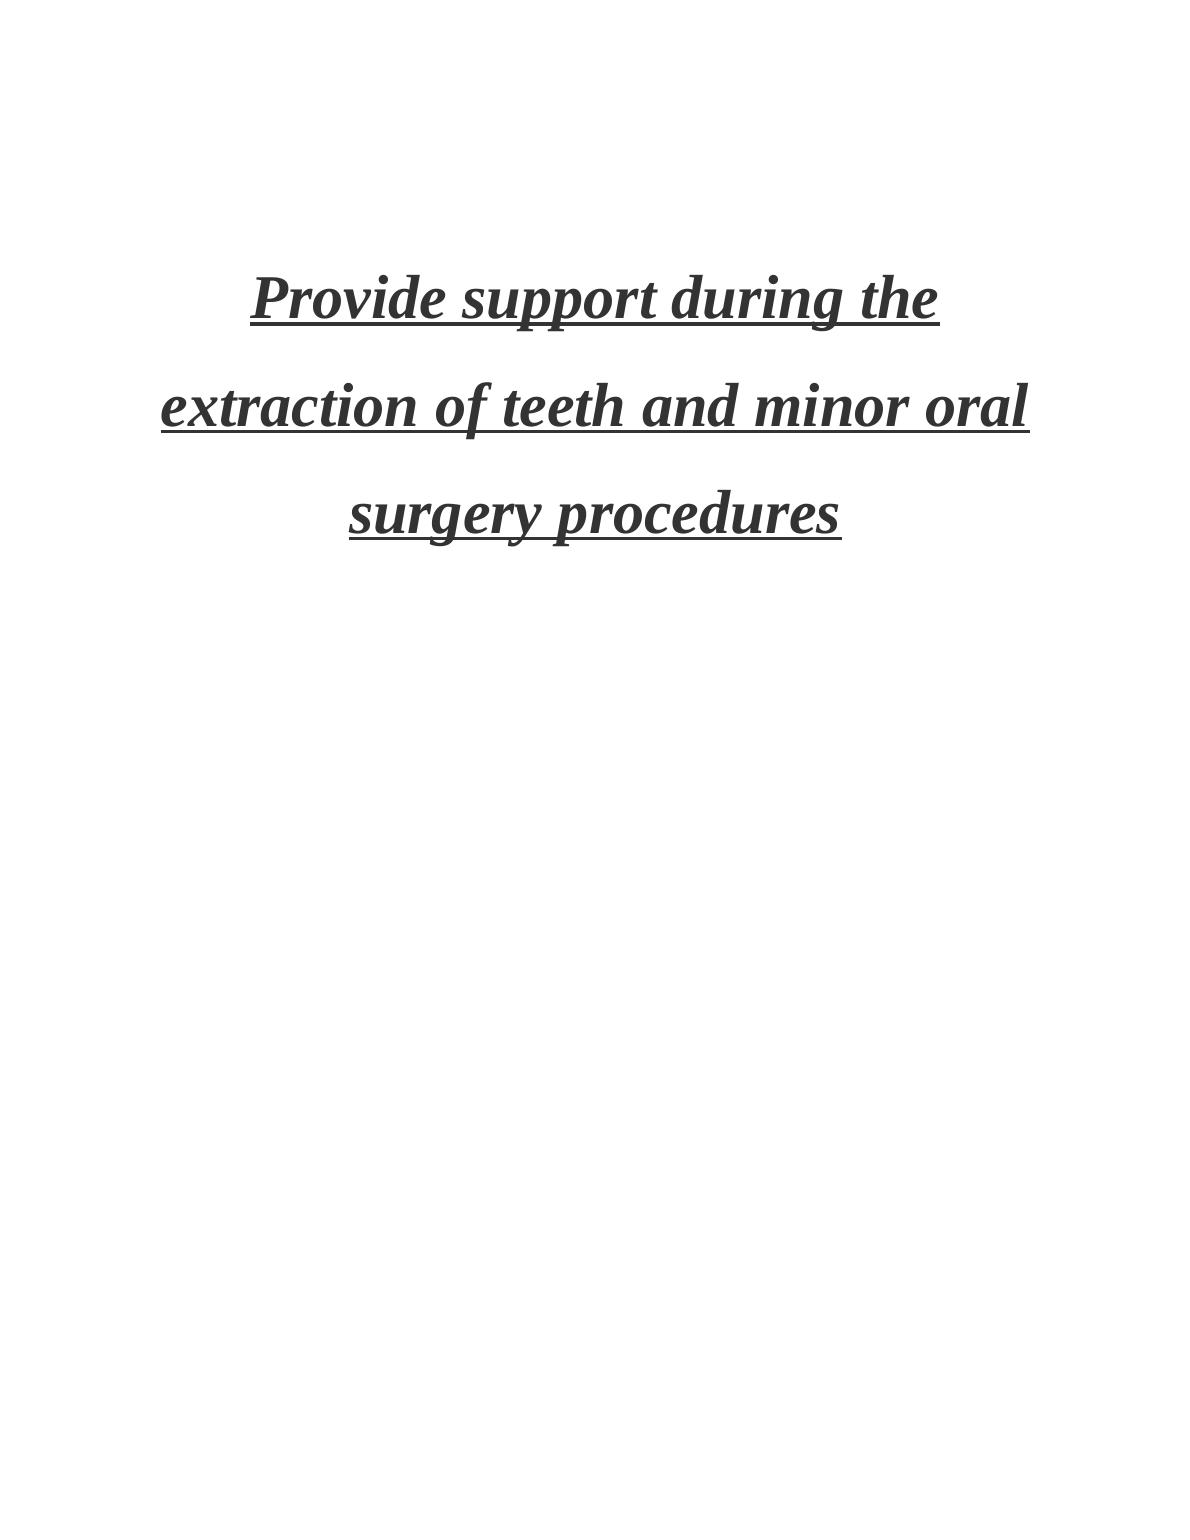 Support for Extraction of Teeth and Minor Oral Surgery Procedures_1